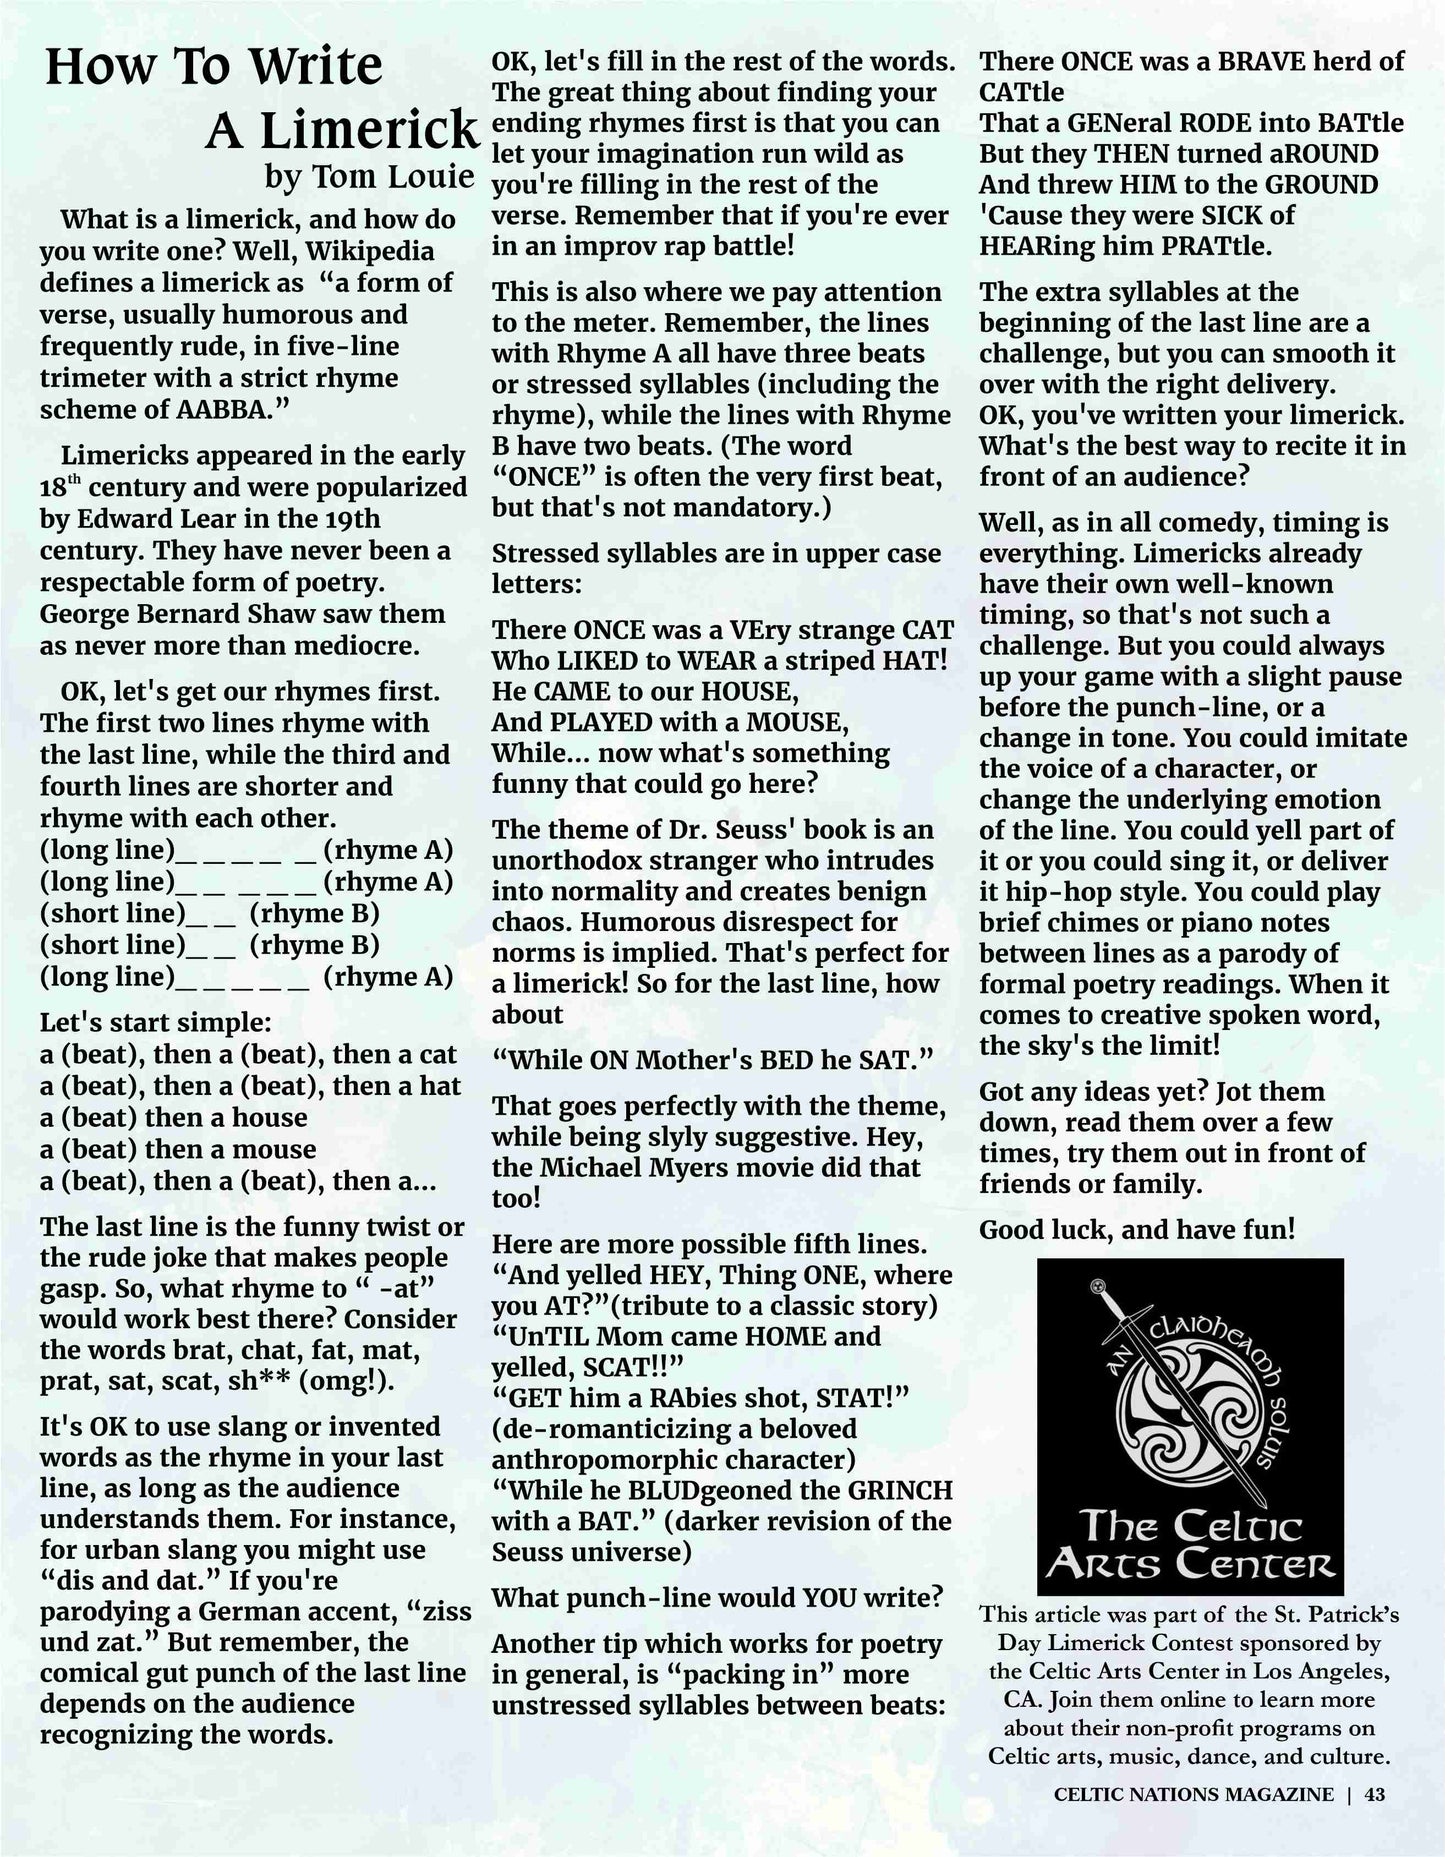 CELTIC NATIONS MAGAZINE - March 2021